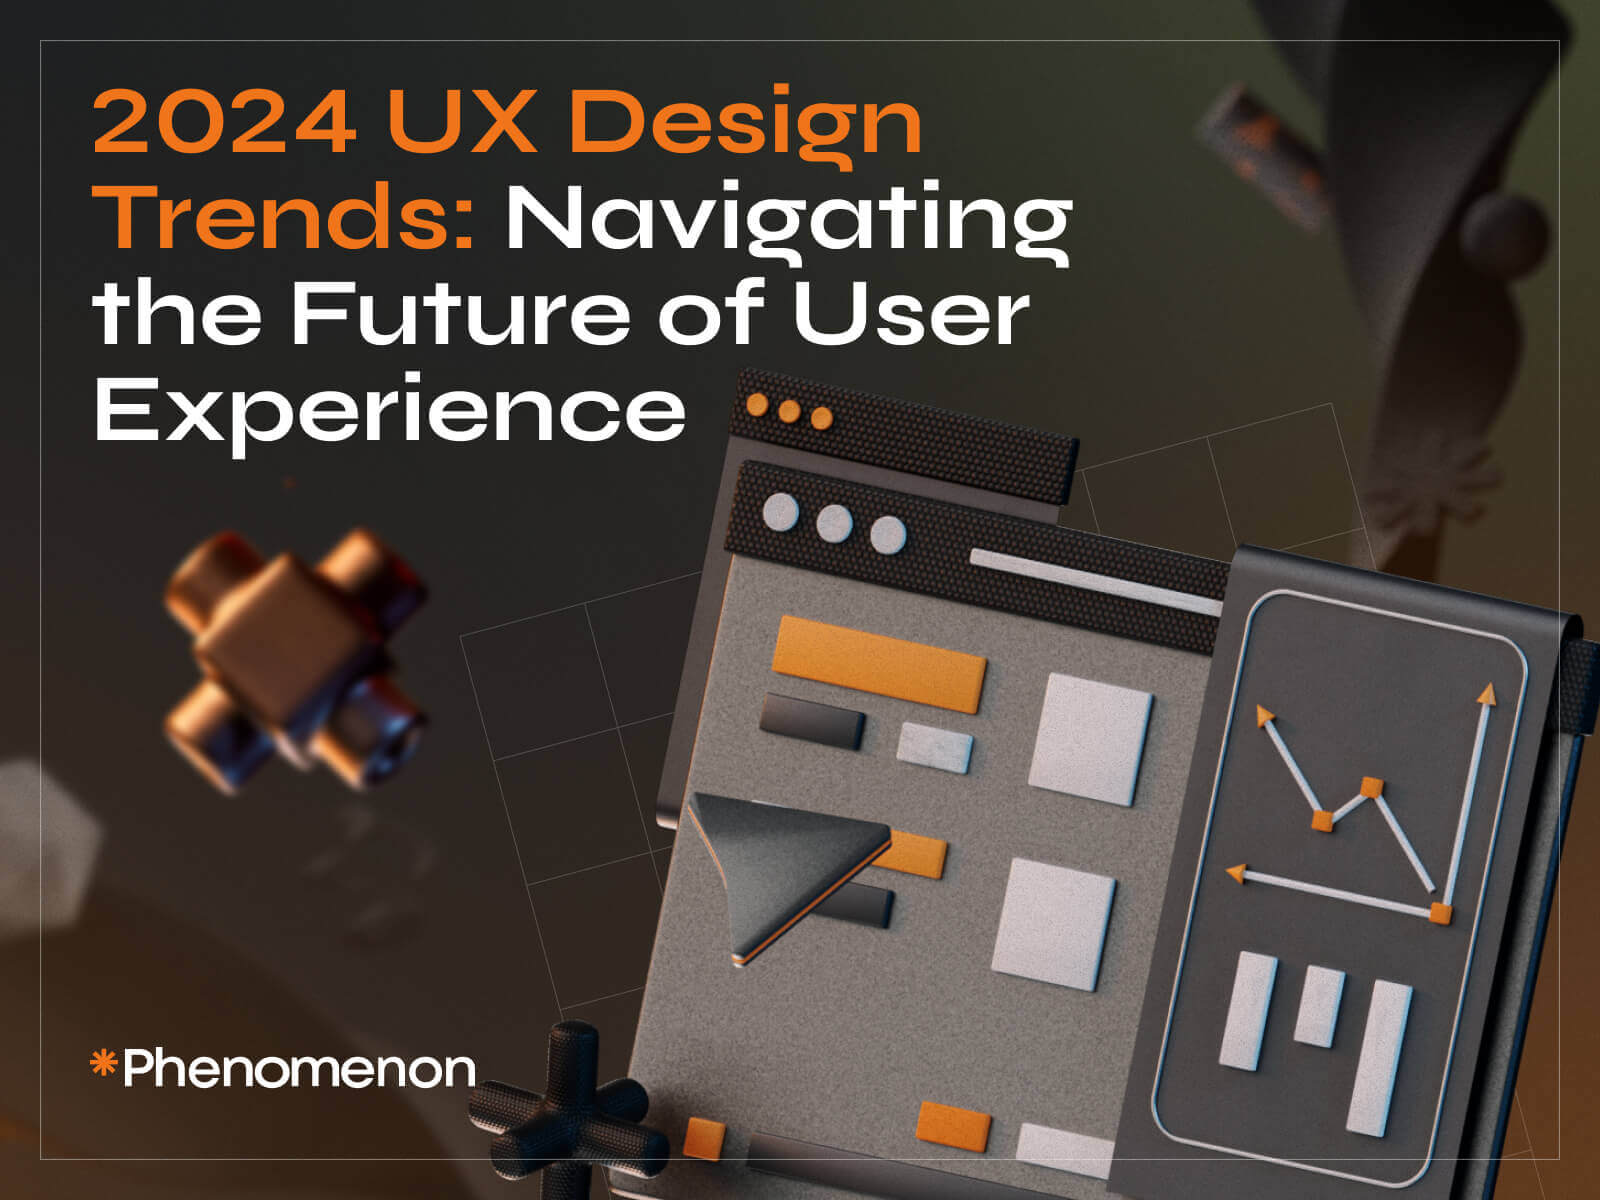 2024 UX Design Trends: Navigating the Future of User Experience - Photo 